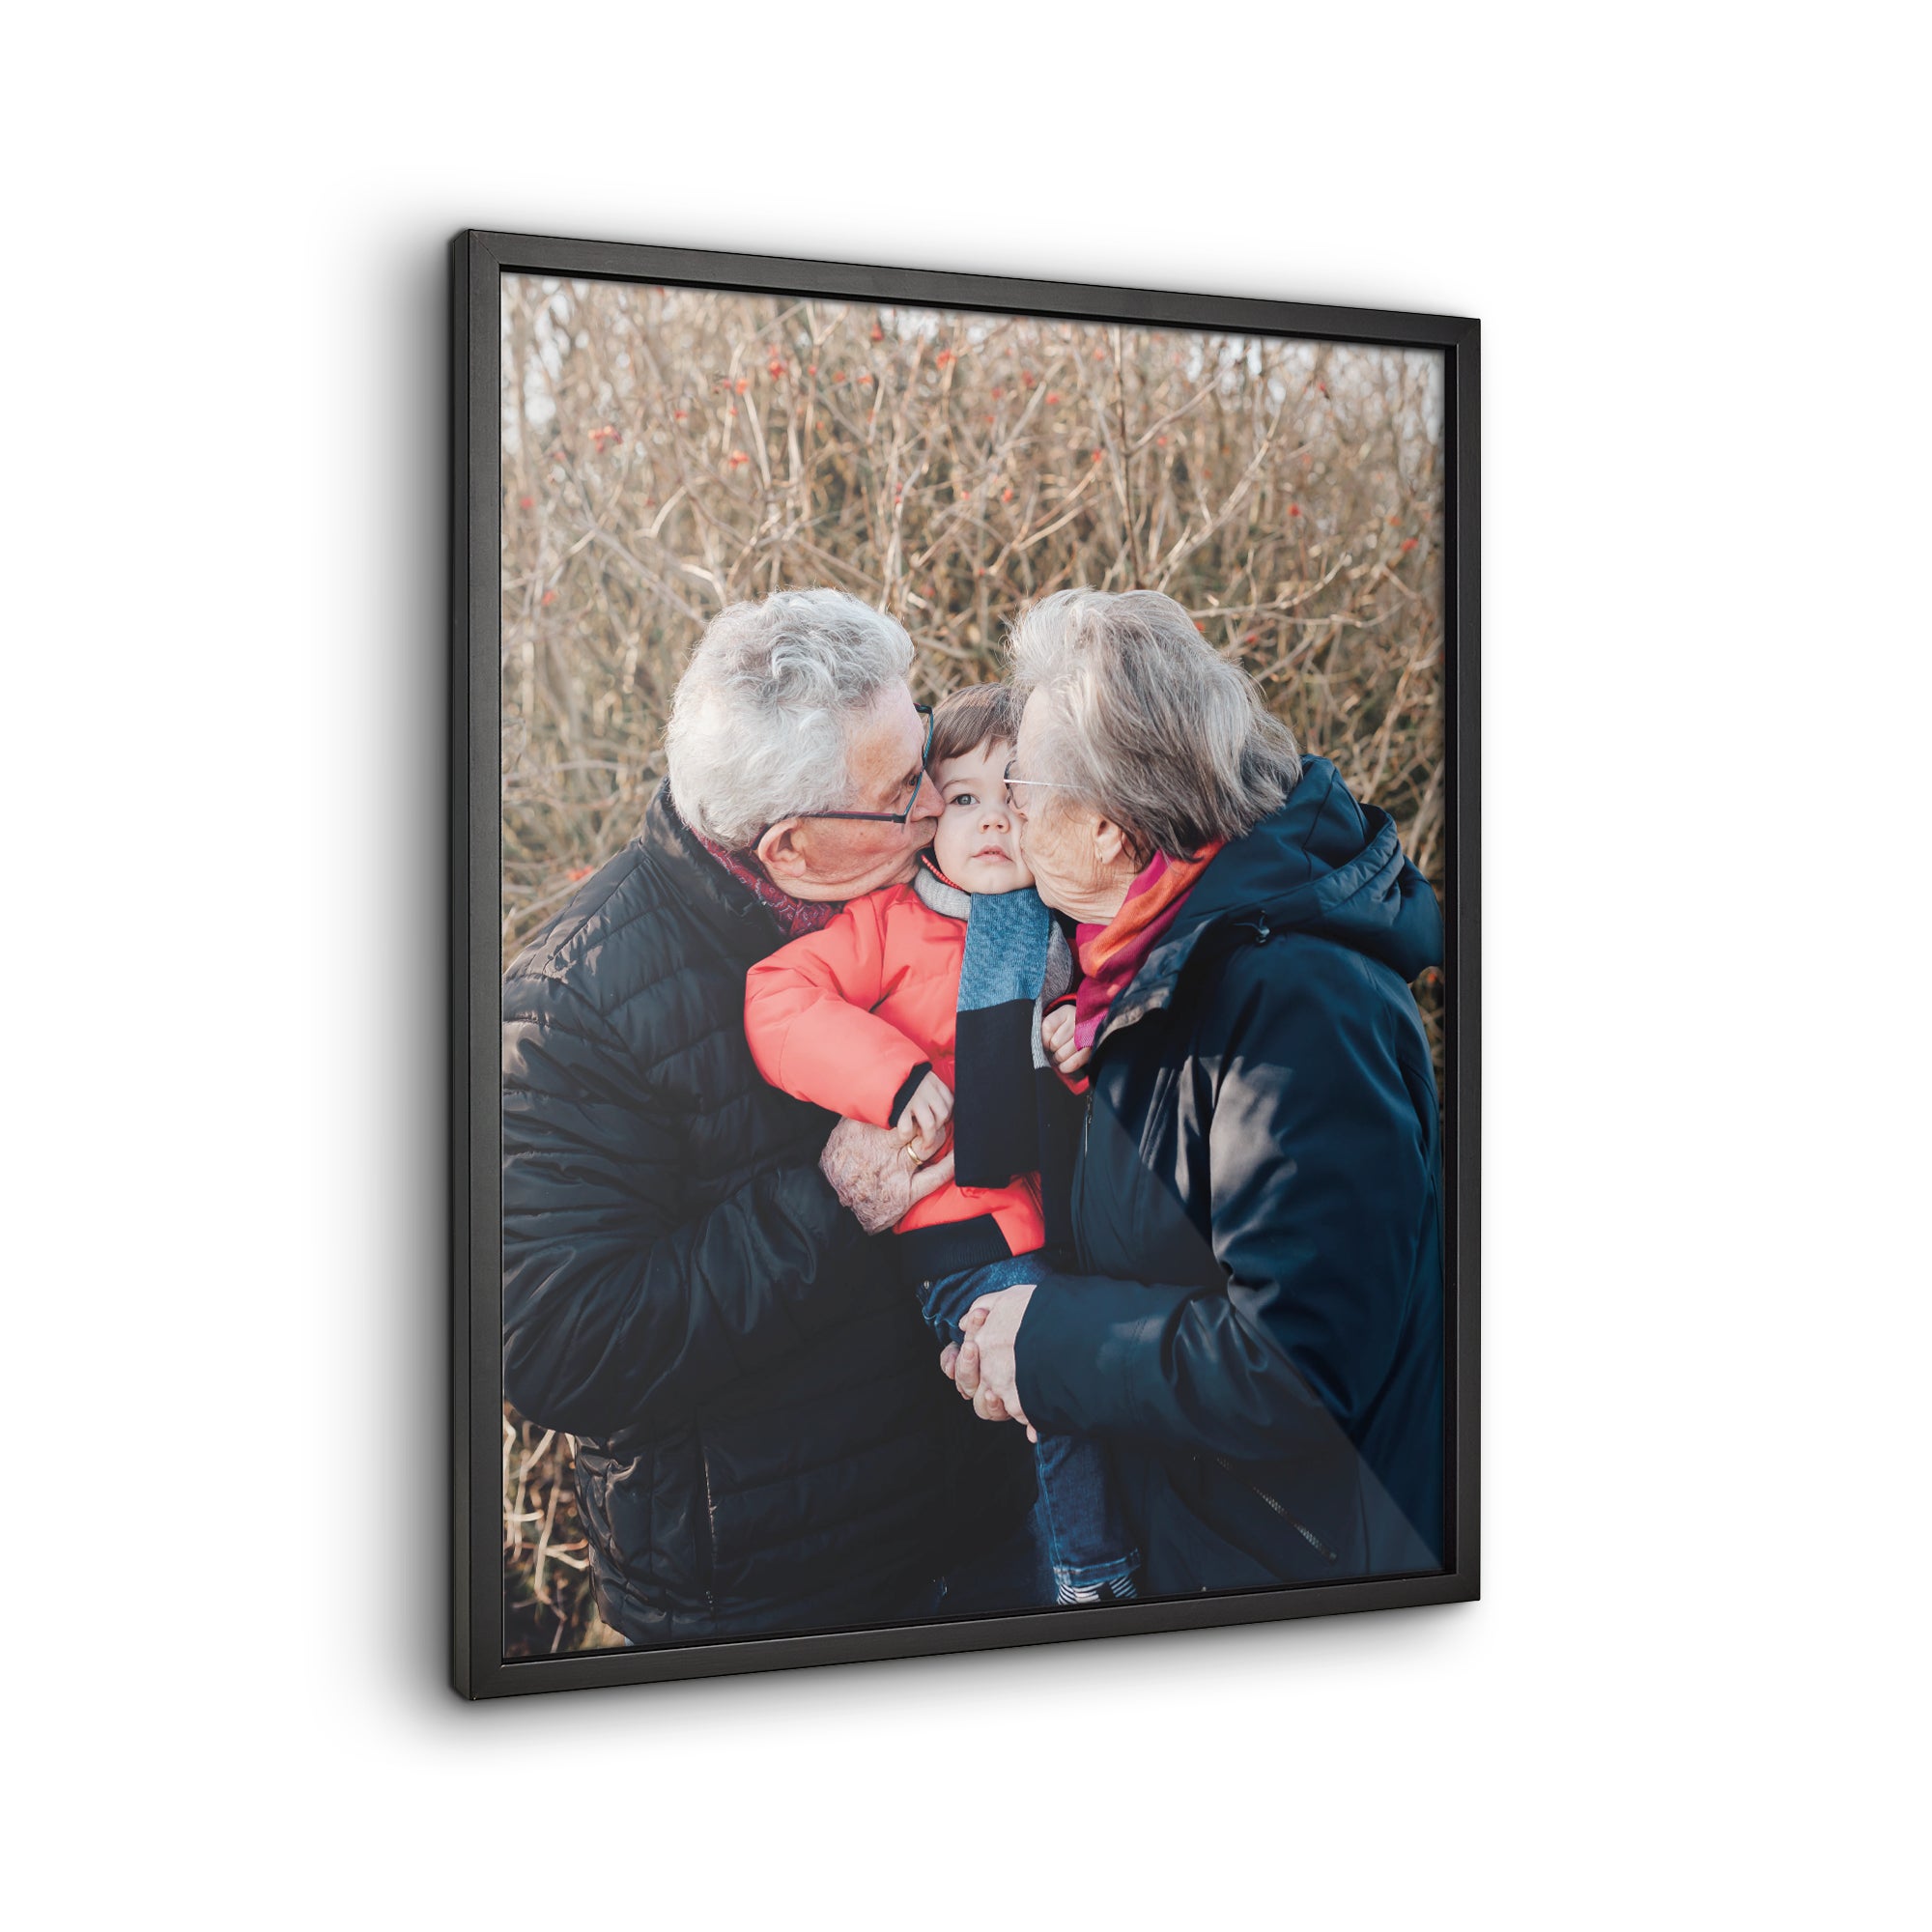 Personalised photo in black frame 40x50